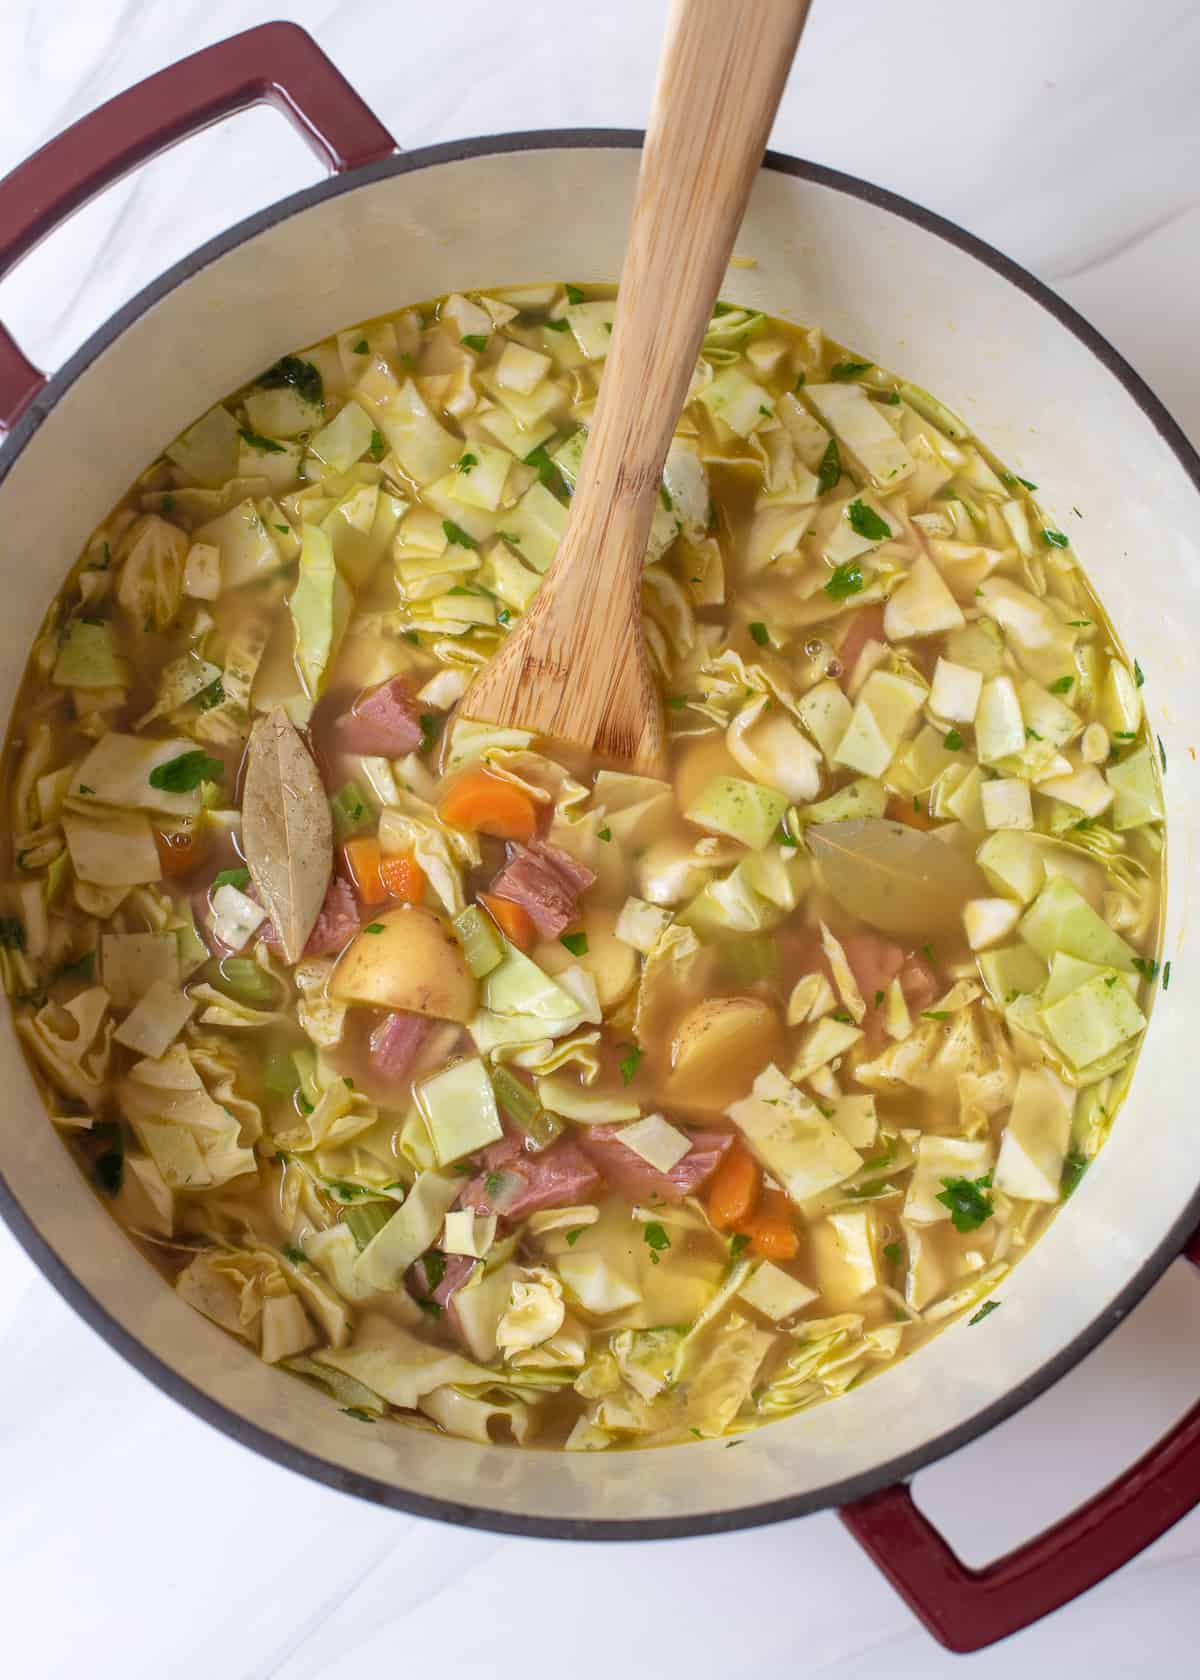 Corned beef and cabbage soup ingredients in a Dutch oven with a wooden spoon.